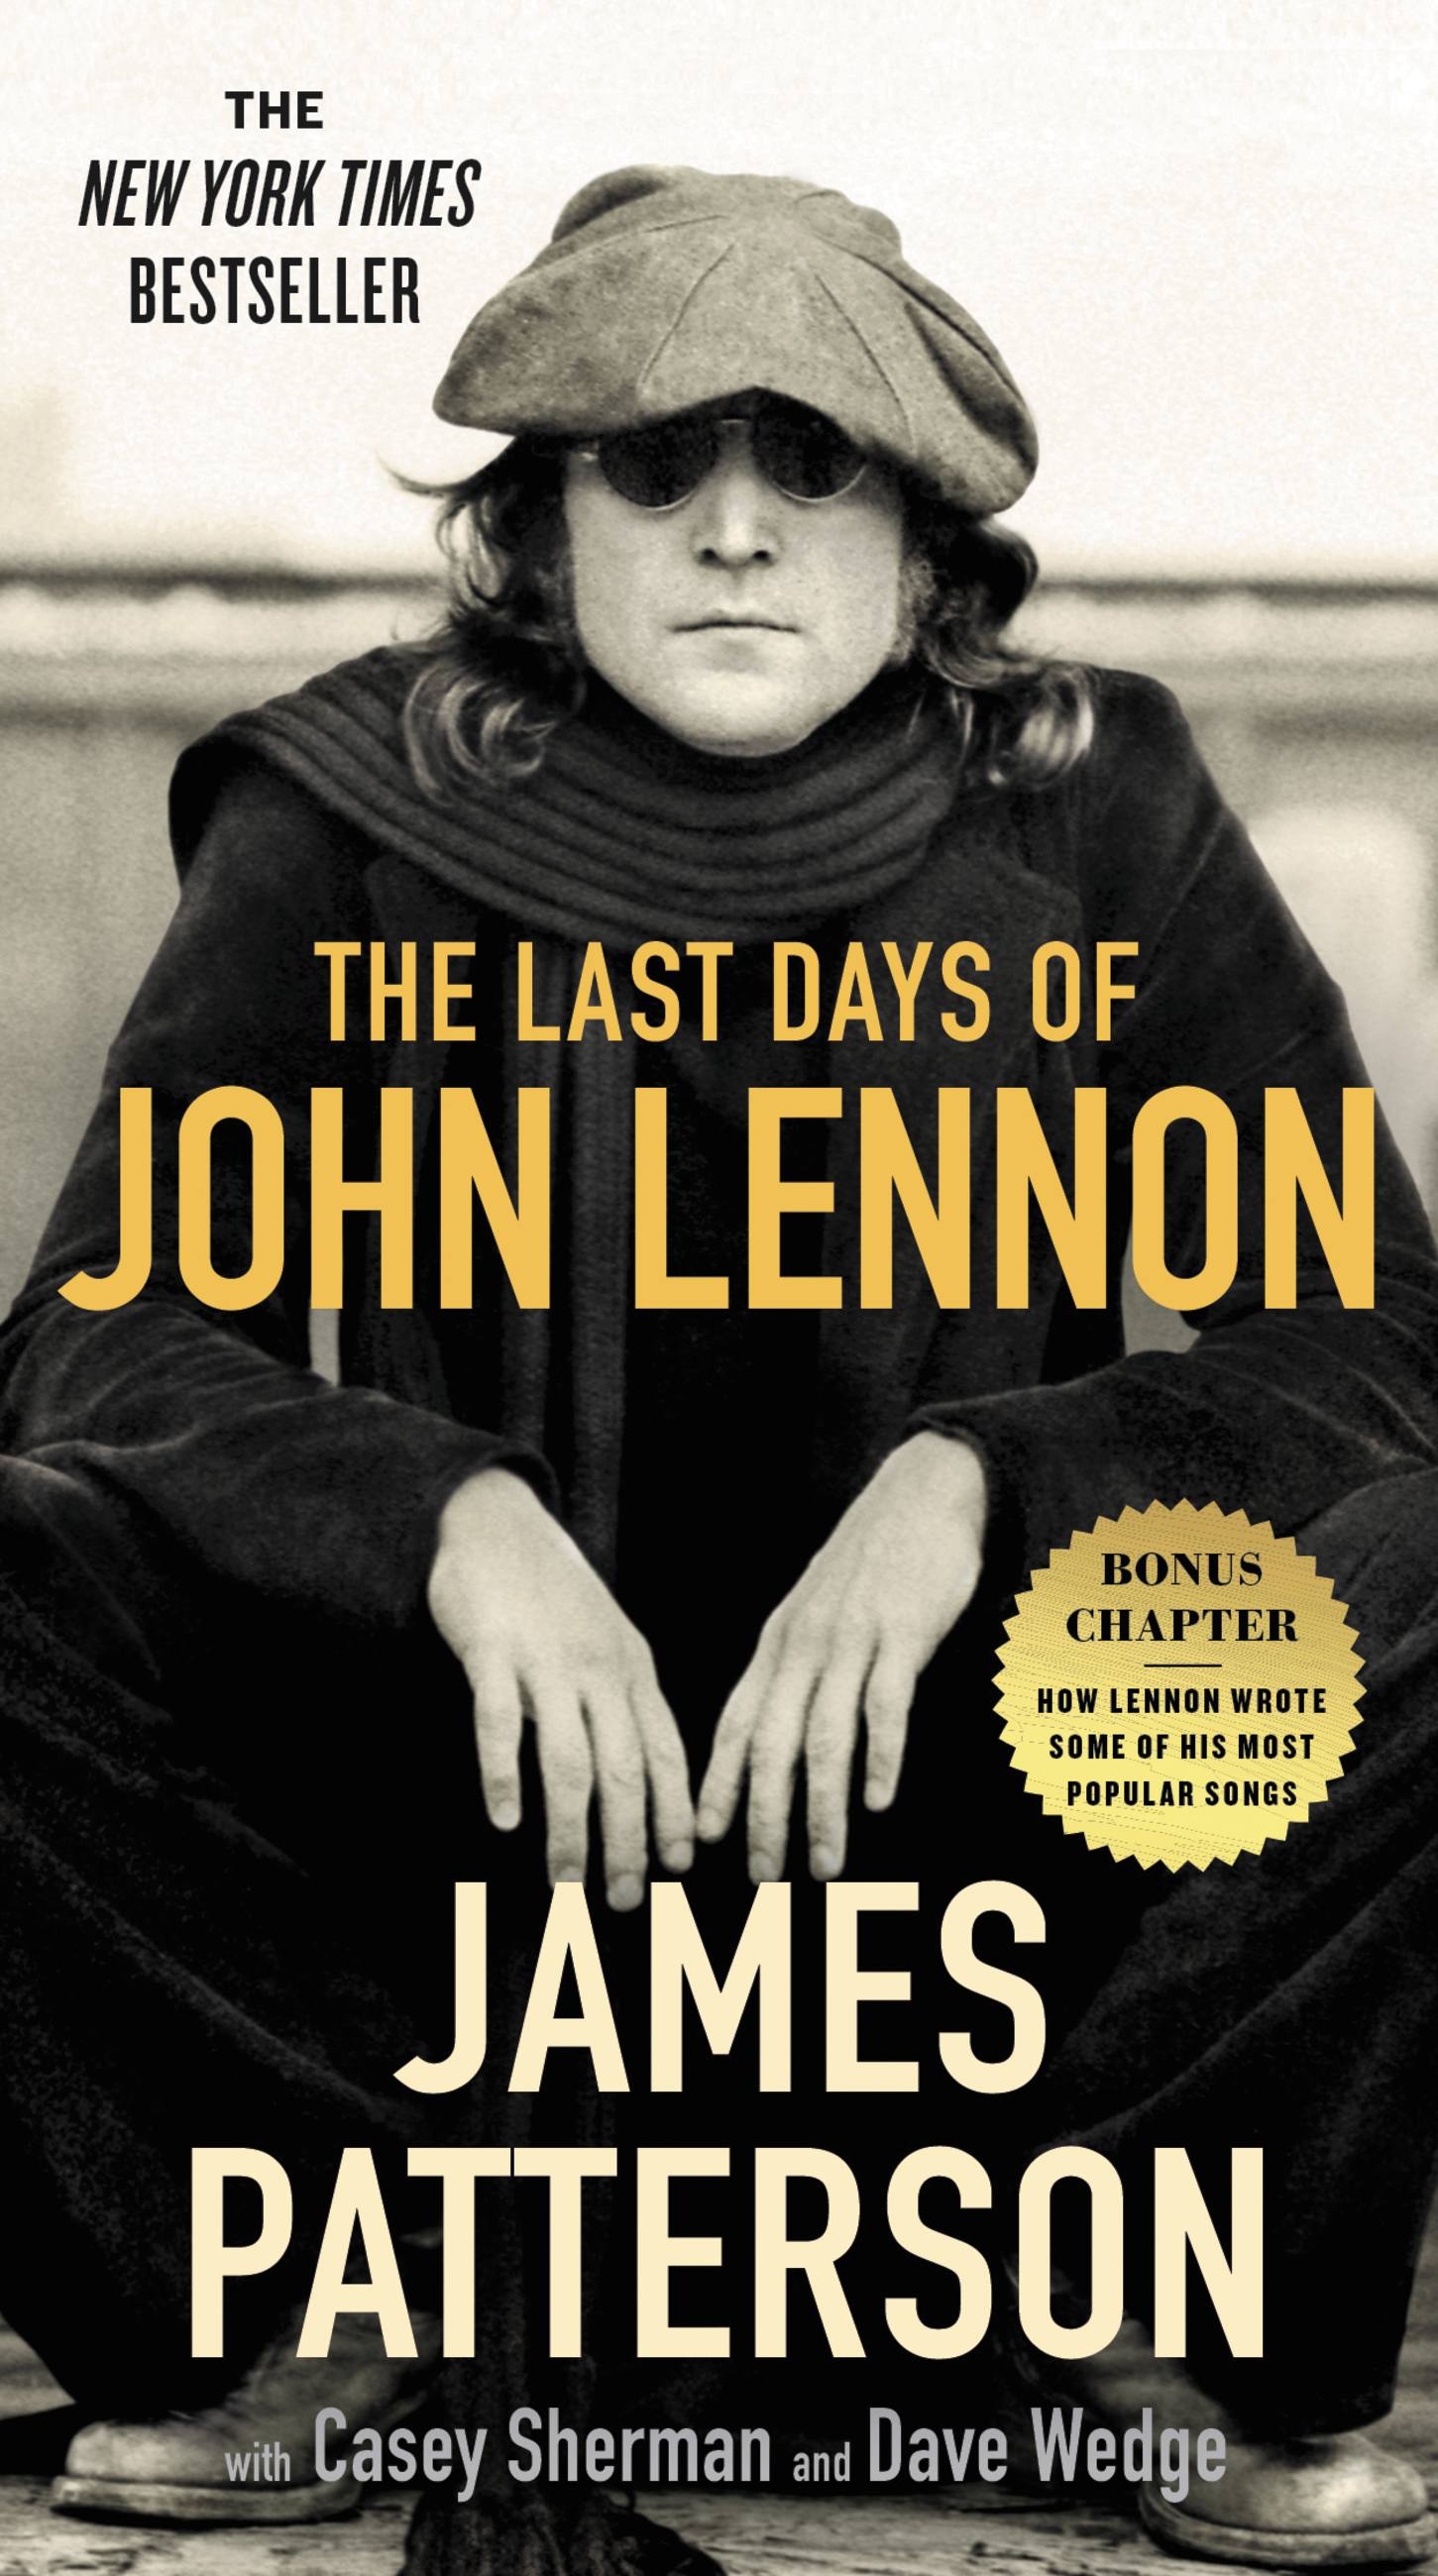 The Last Days of John Lennon by James Patterson | Hachette Book Group